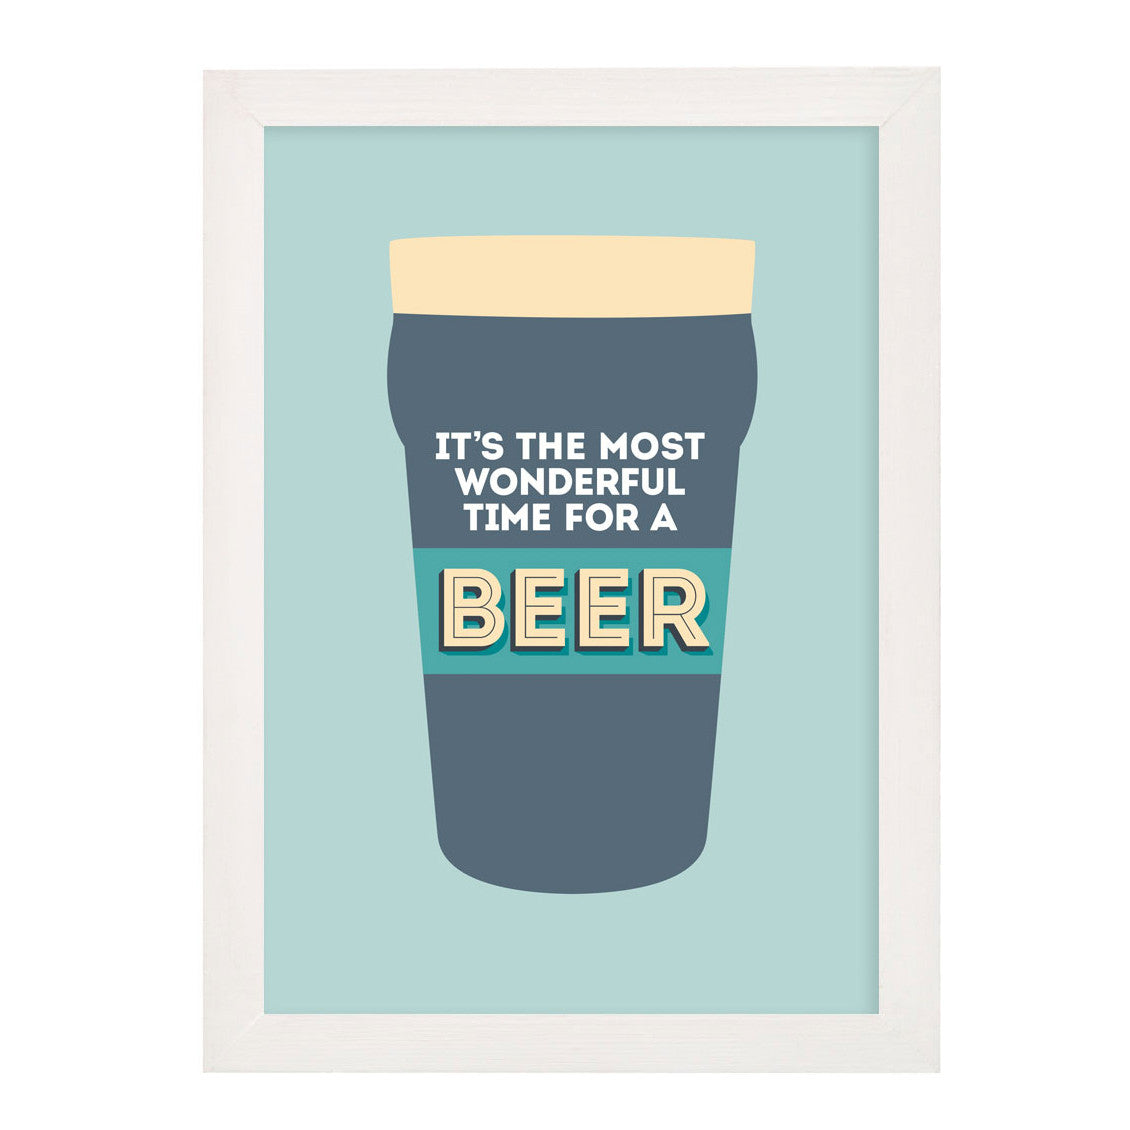 It's the Most wonderful time for a beer print